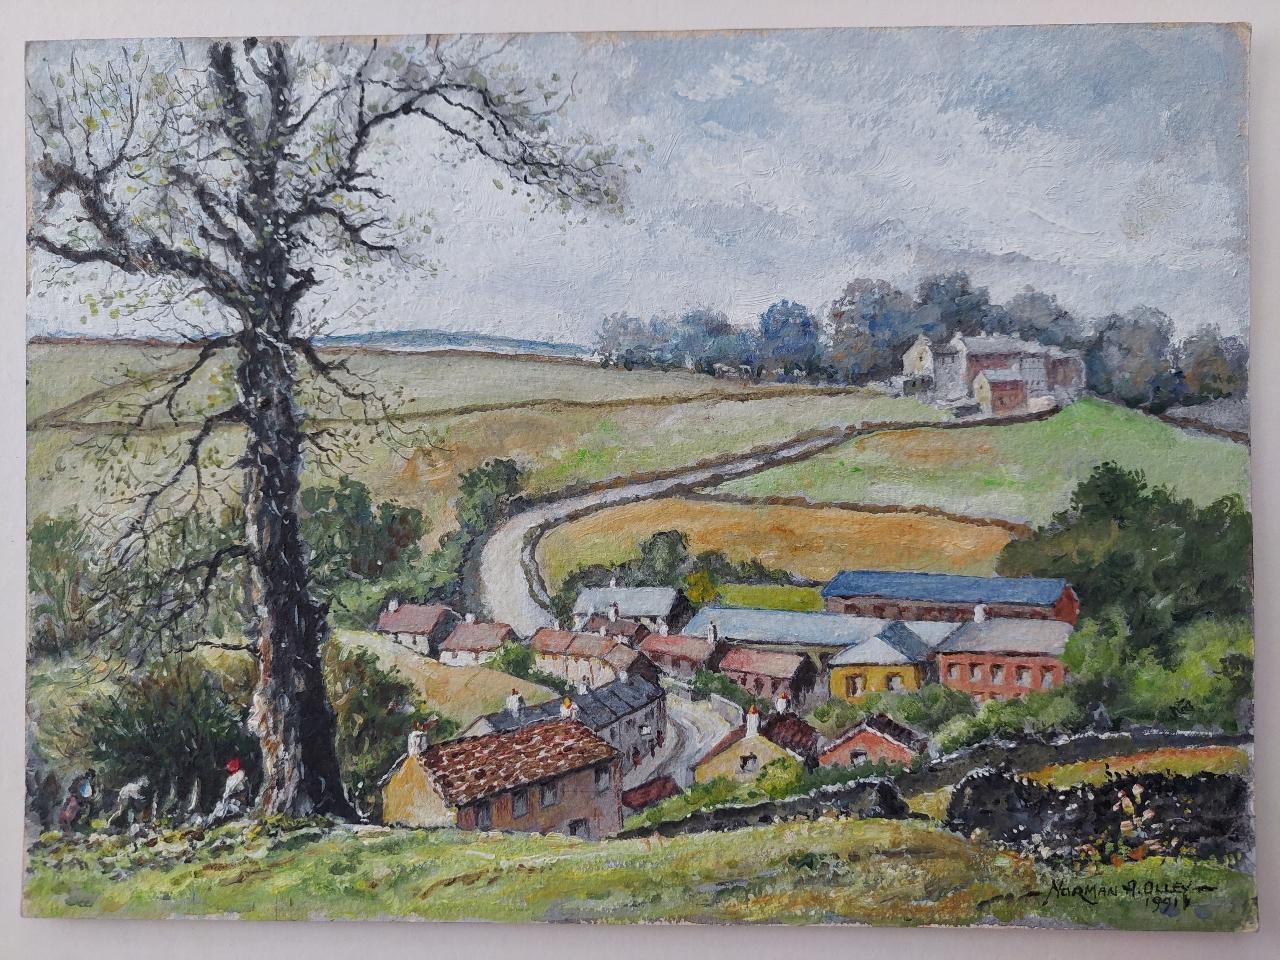 Artist/ School: Norman A. Olley ( British, 20th Century, 1908-1996), 1991, signed to the front and inscribed verso

Title - View of Goose Eye Farm near Braithwaite Yorkshire, England. Charming rural farming landscape in the Yorkshire Dales. Figures